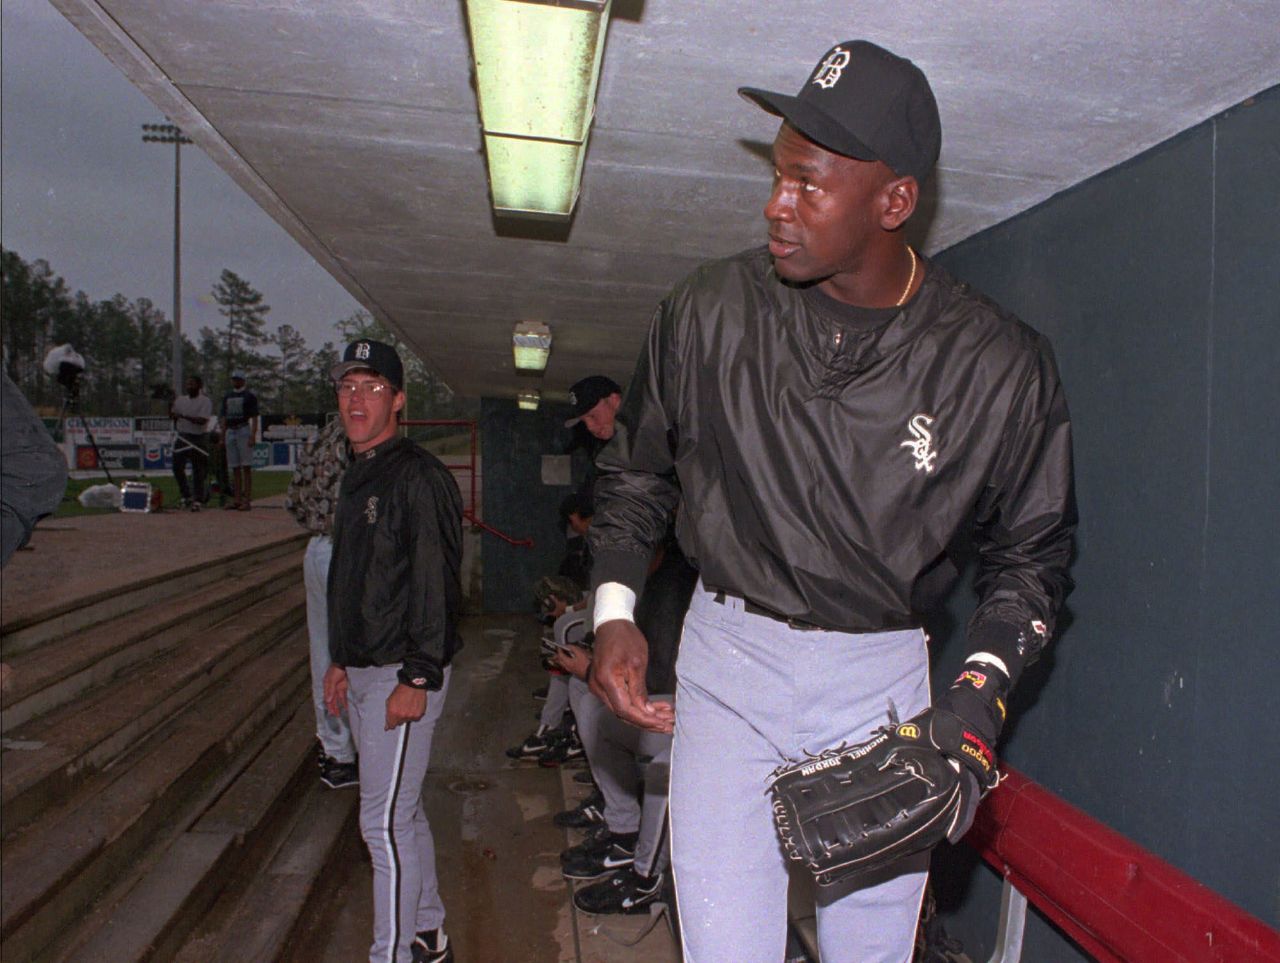 After retiring, Jordan pursued the baseball career he envisioned when he was younger. In February 1994, Jordan signed a minor-league baseball contract with the Chicago White Sox and was assigned to their Double-A affiliate in Birmingham, Alabama. News outlets closely followed Jordan's journey, and fans came out in droves to watch him play. 